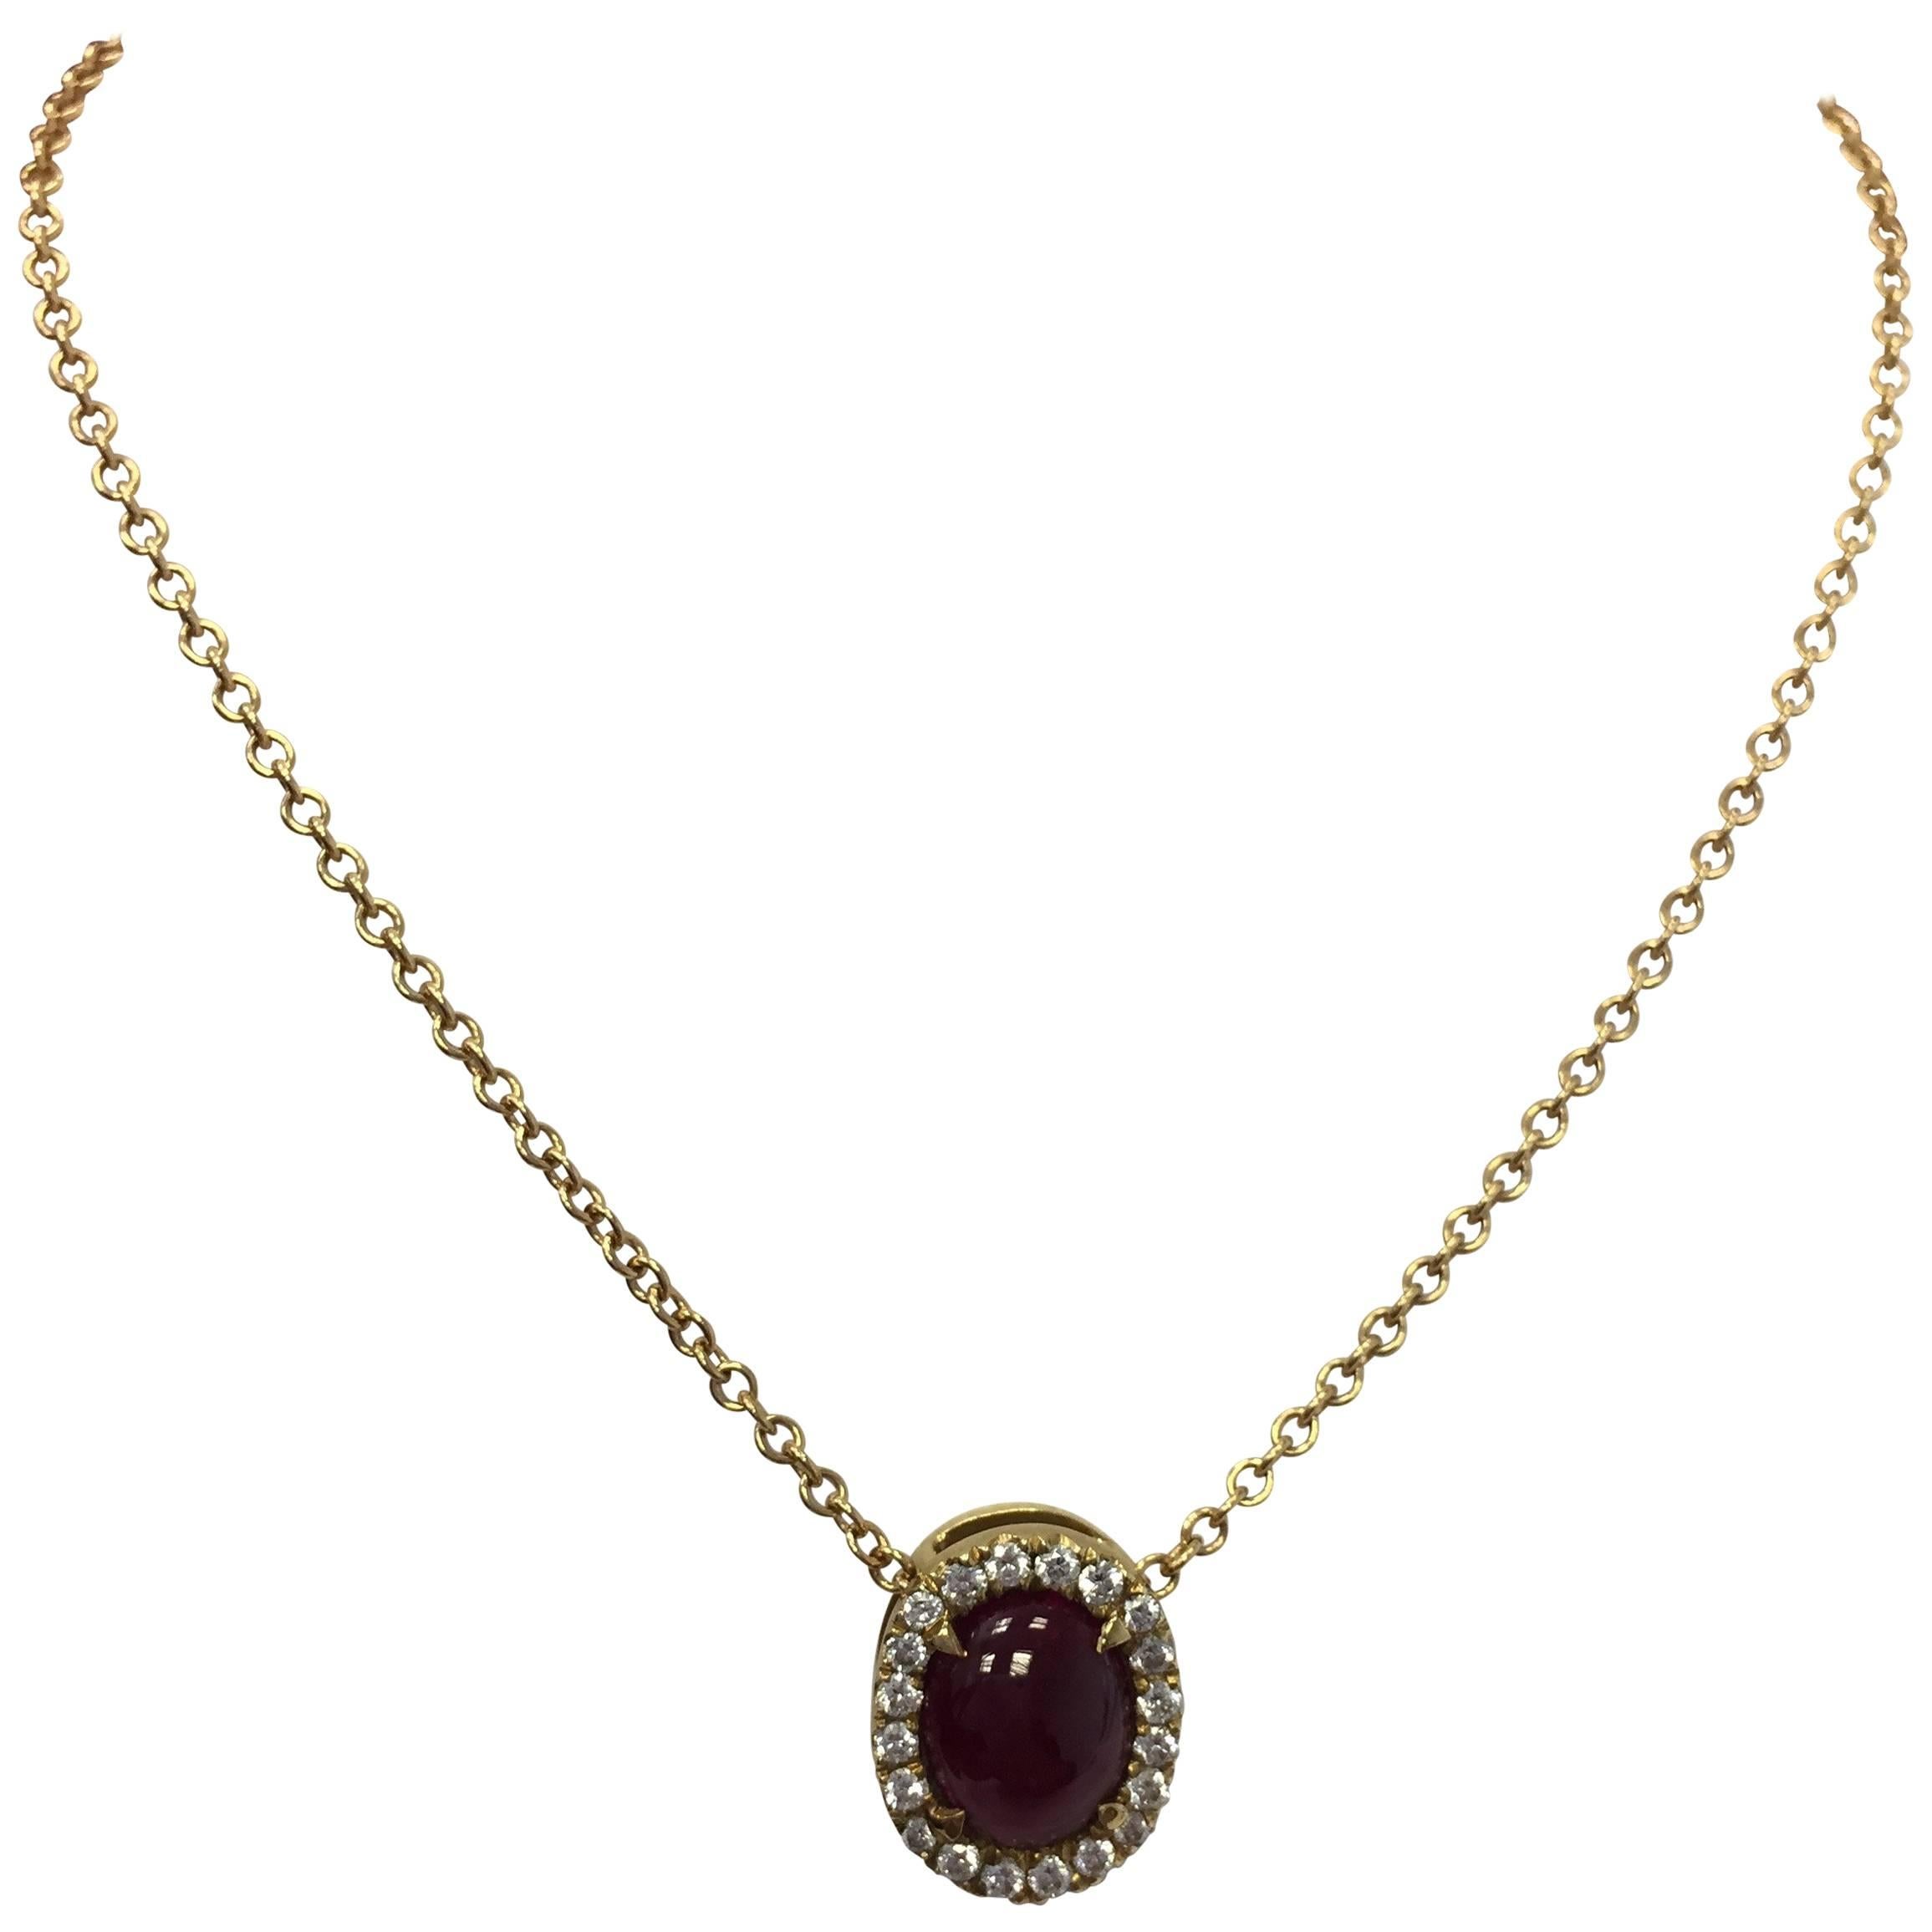 Oval Ruby Cabochon and Diamond Pendant Necklace in 18 Karat Yellow Gold